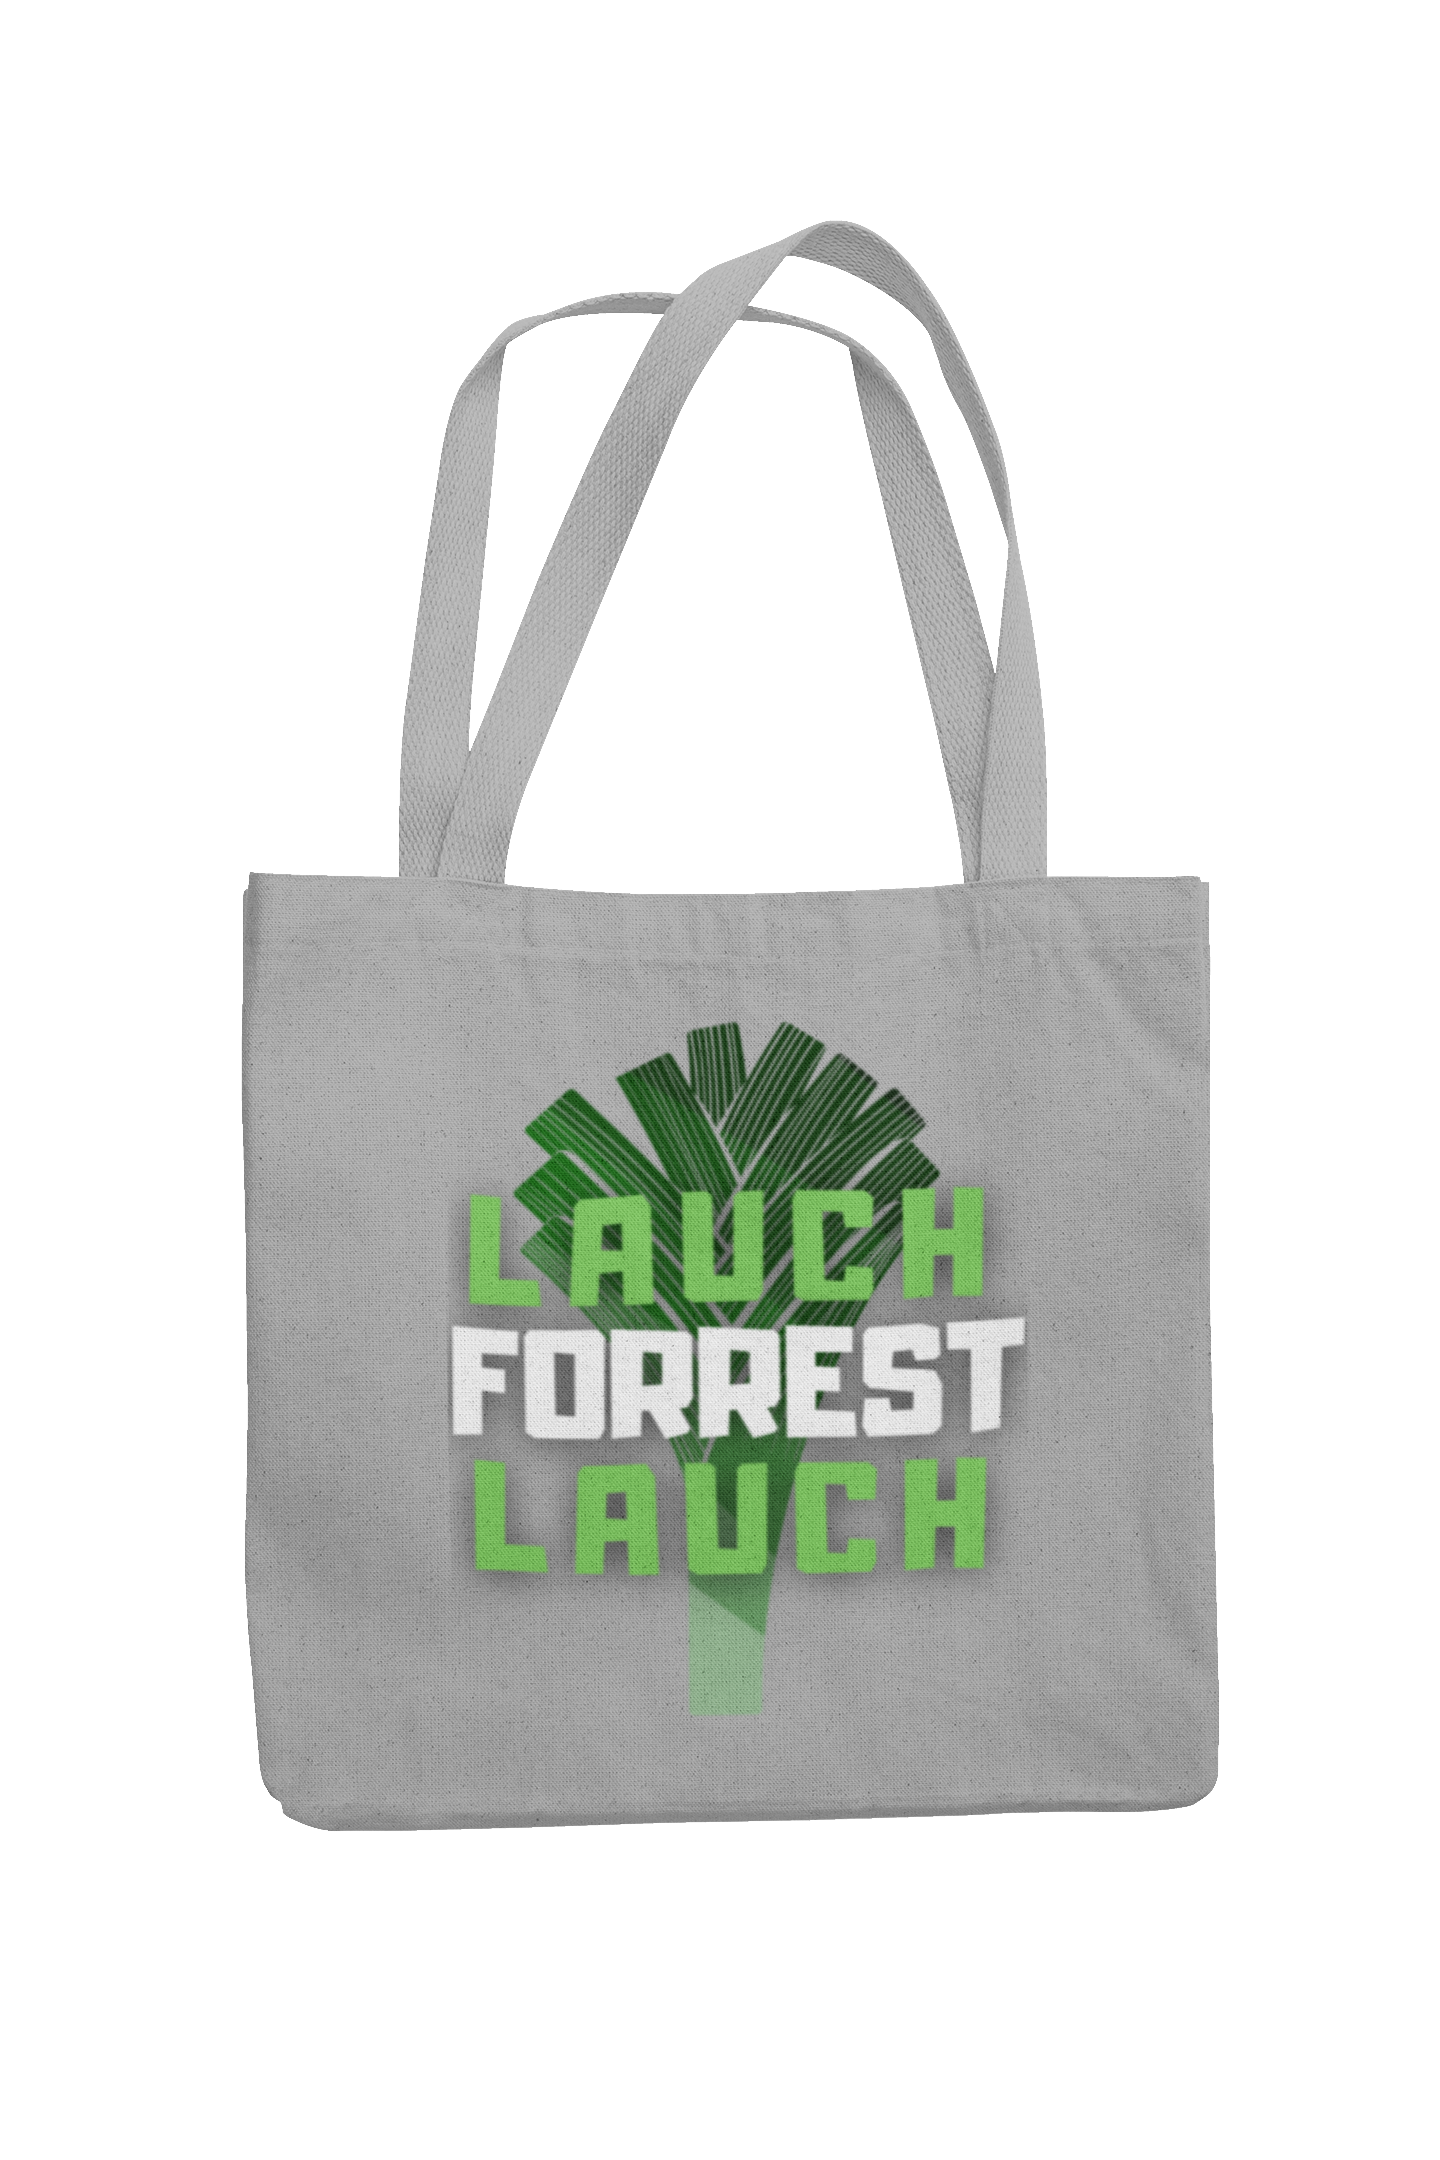 Lauch Forrest Lauch - Tote-Bag